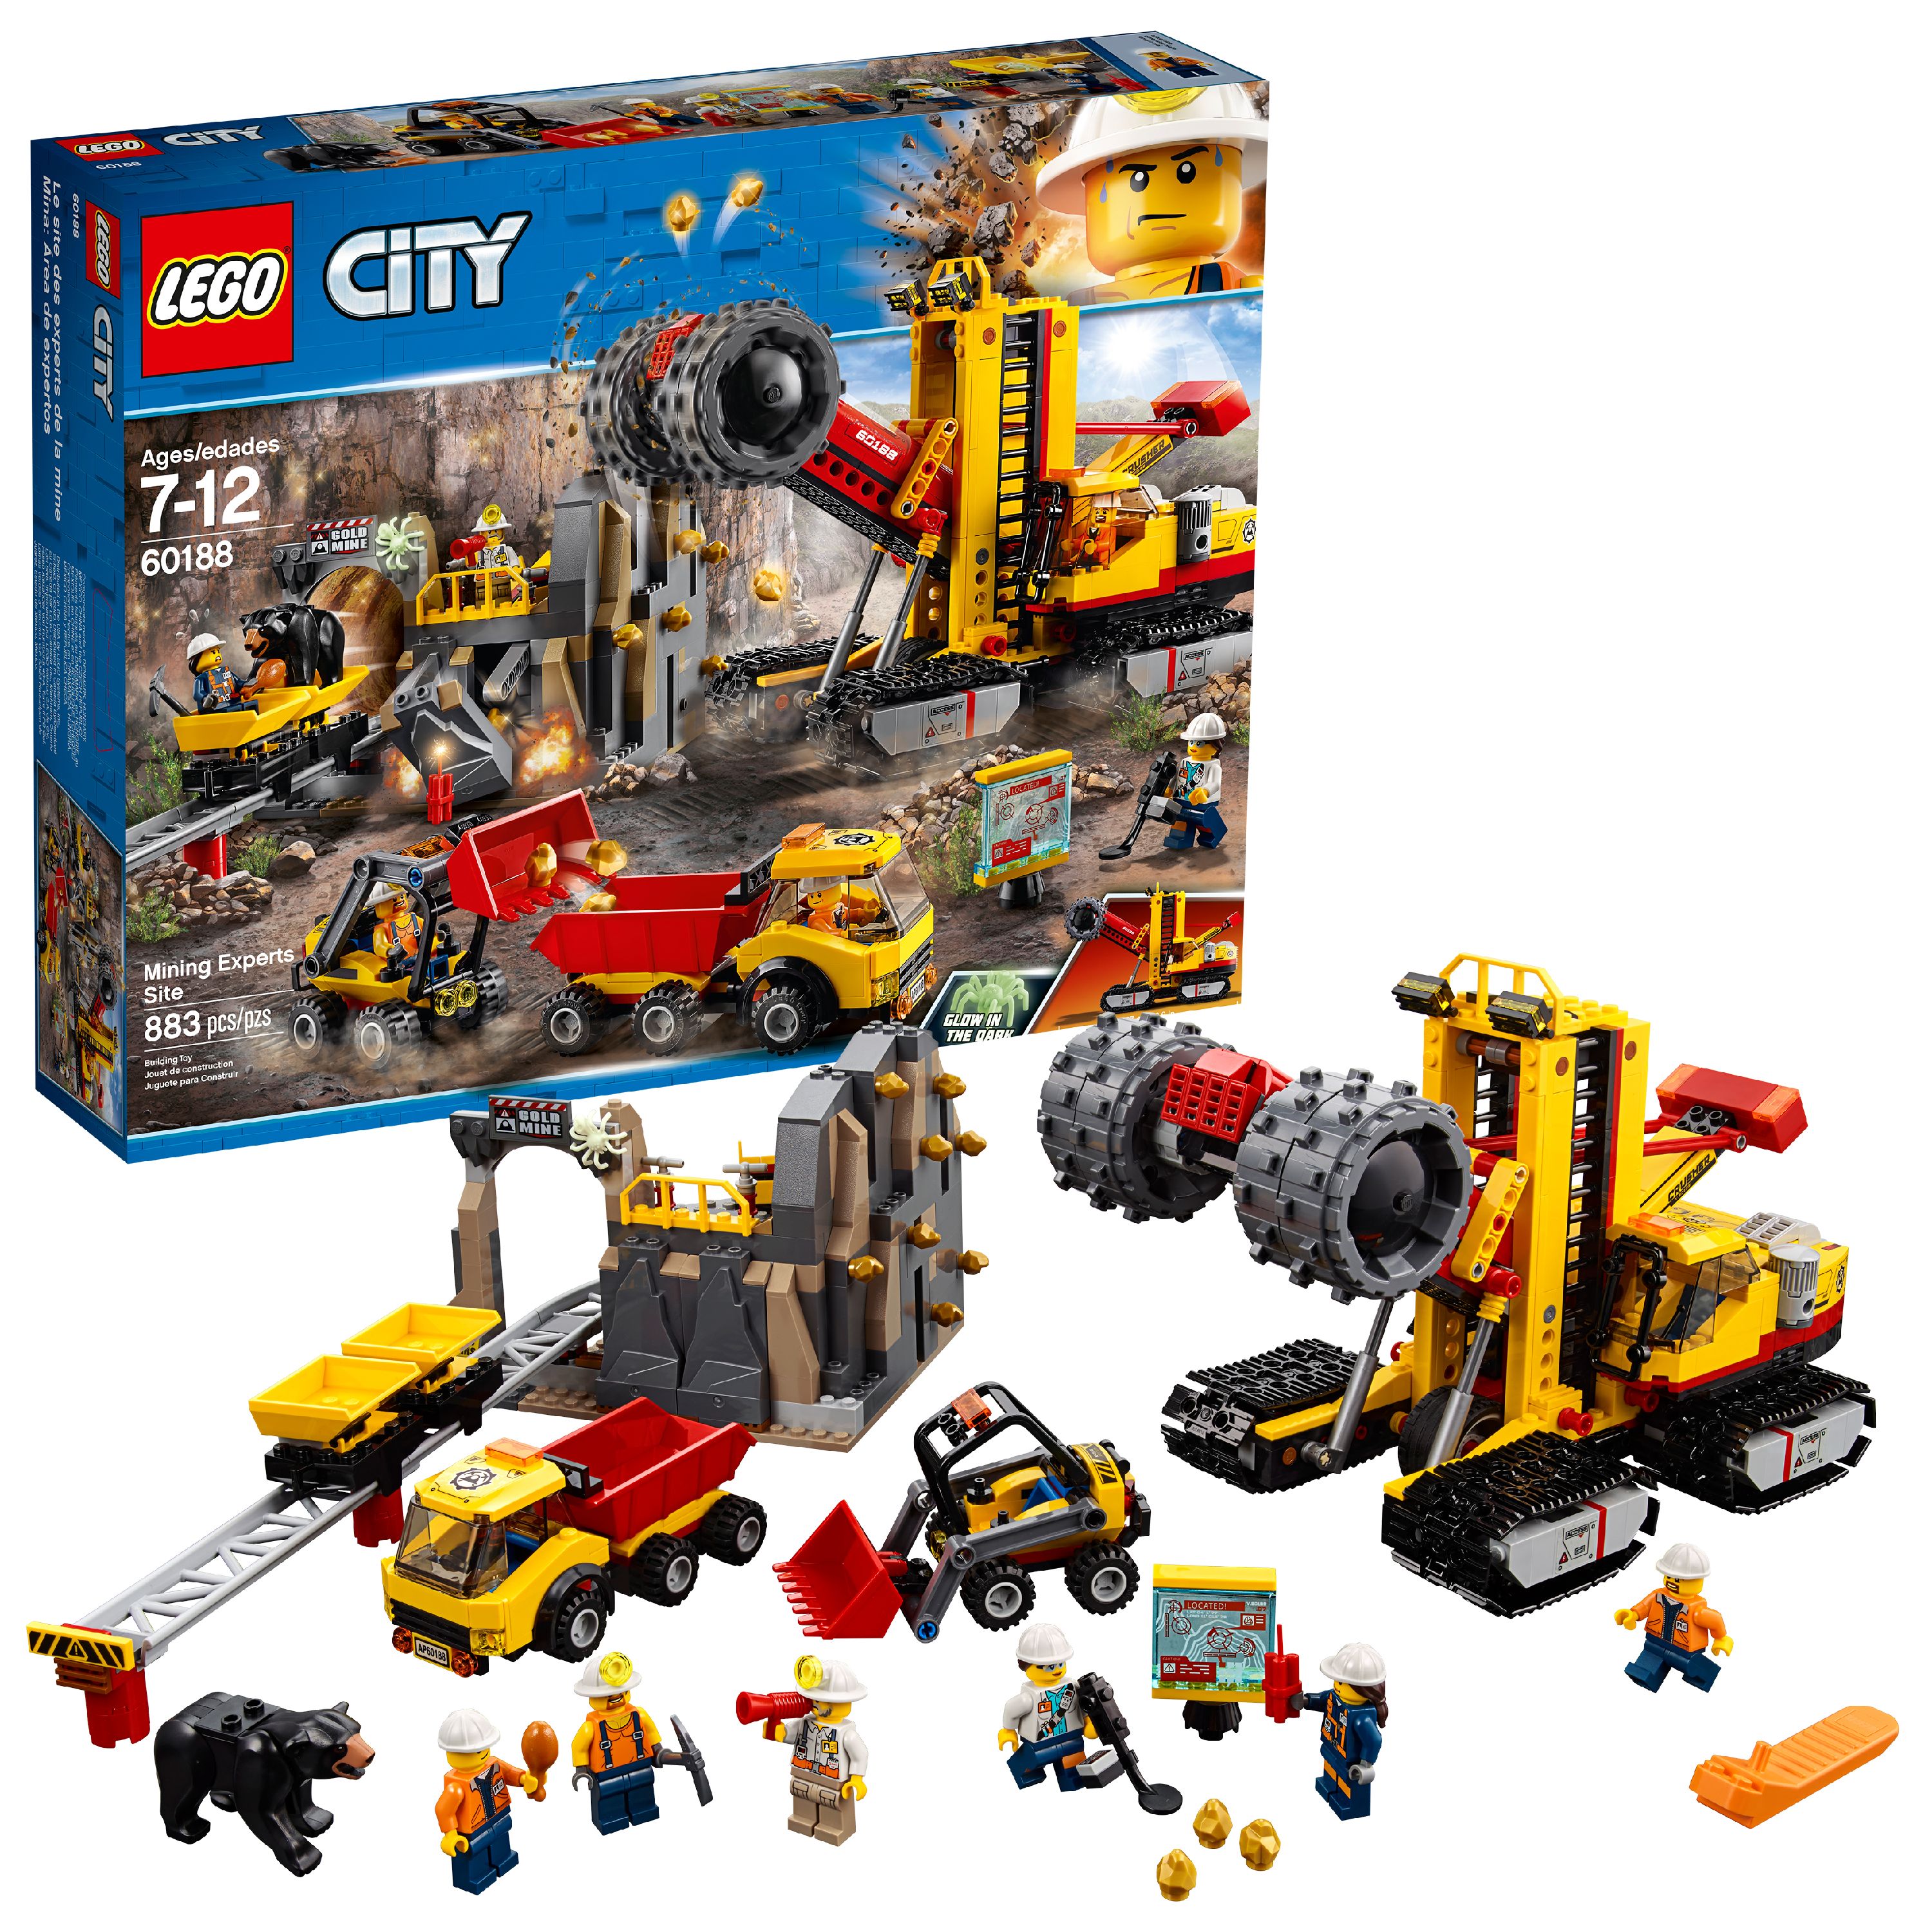 LEGO City Mining Experts Site 60188 Building Set (883 Pieces) - image 1 of 7